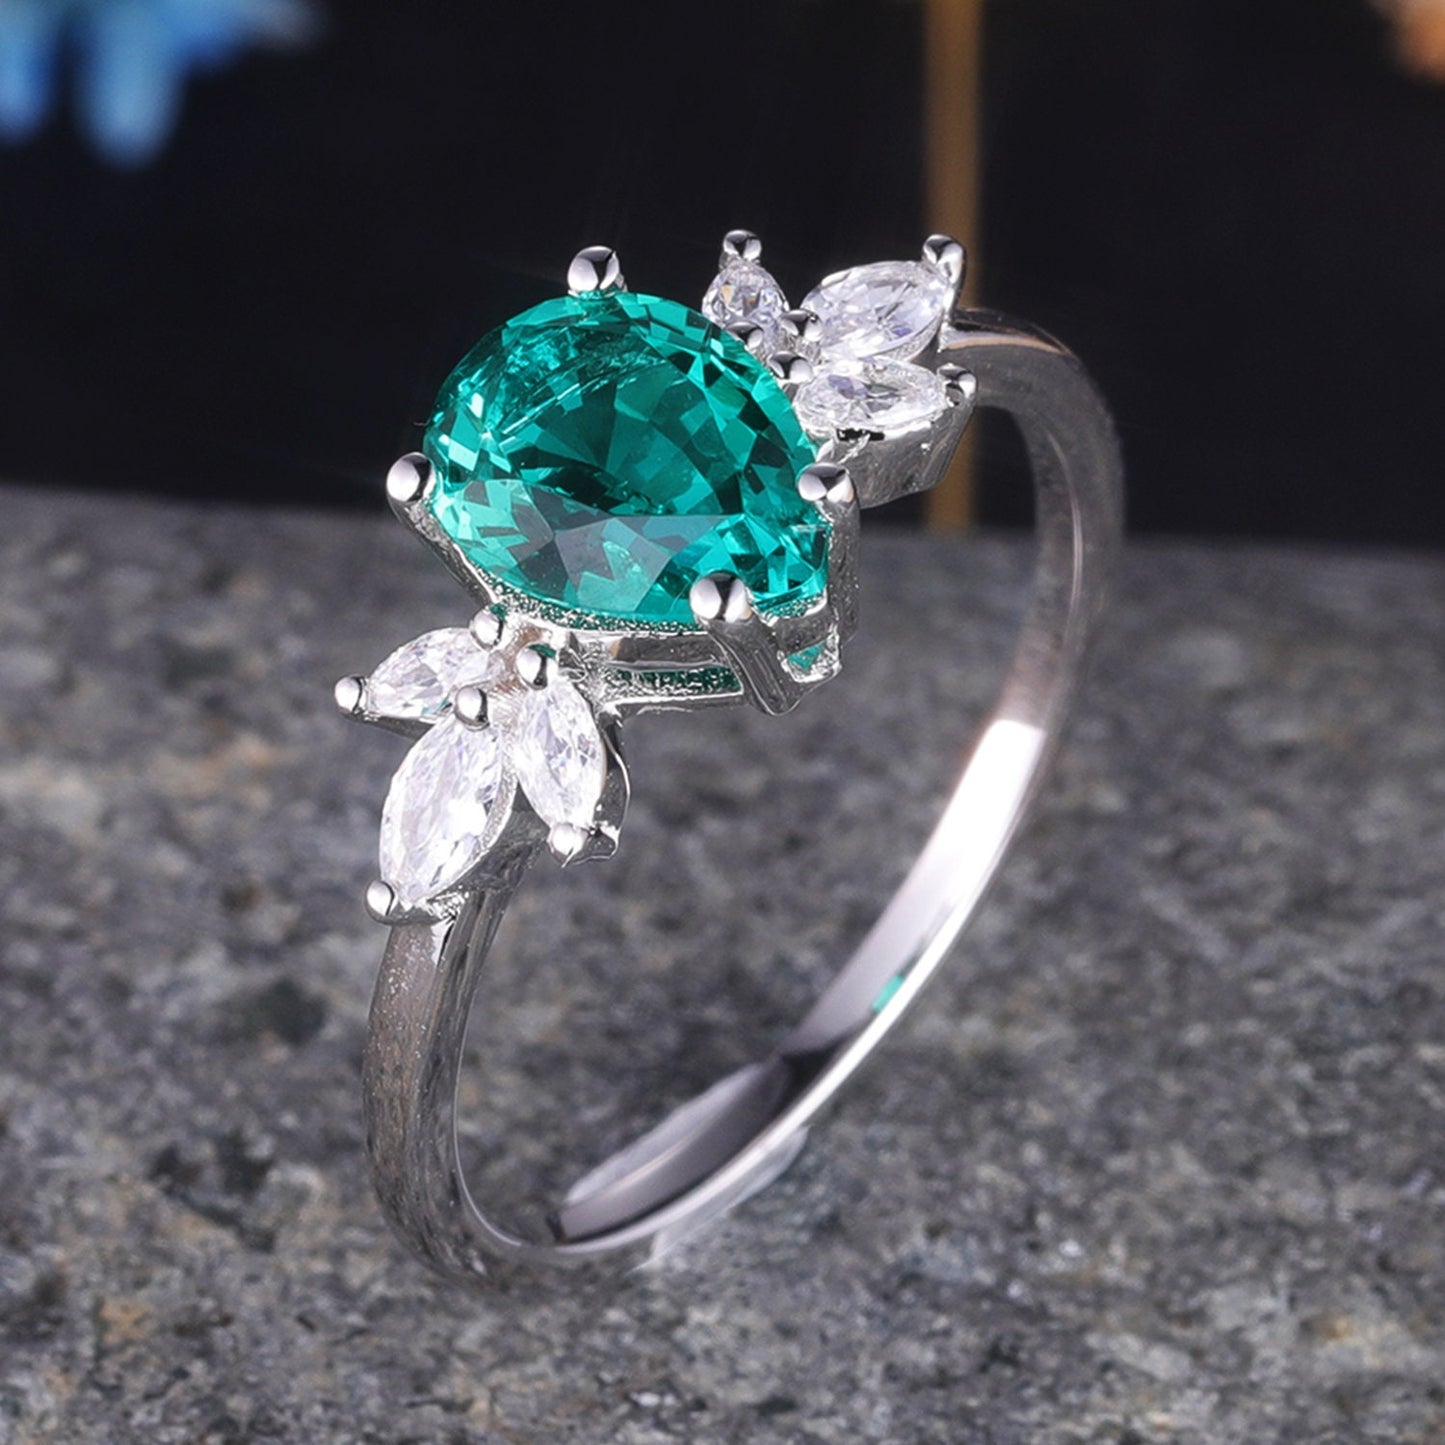 White gold emerald engagement ring women art deco ring moissanite wedding band vintage bridal jewelry May birthstone anniversary gift